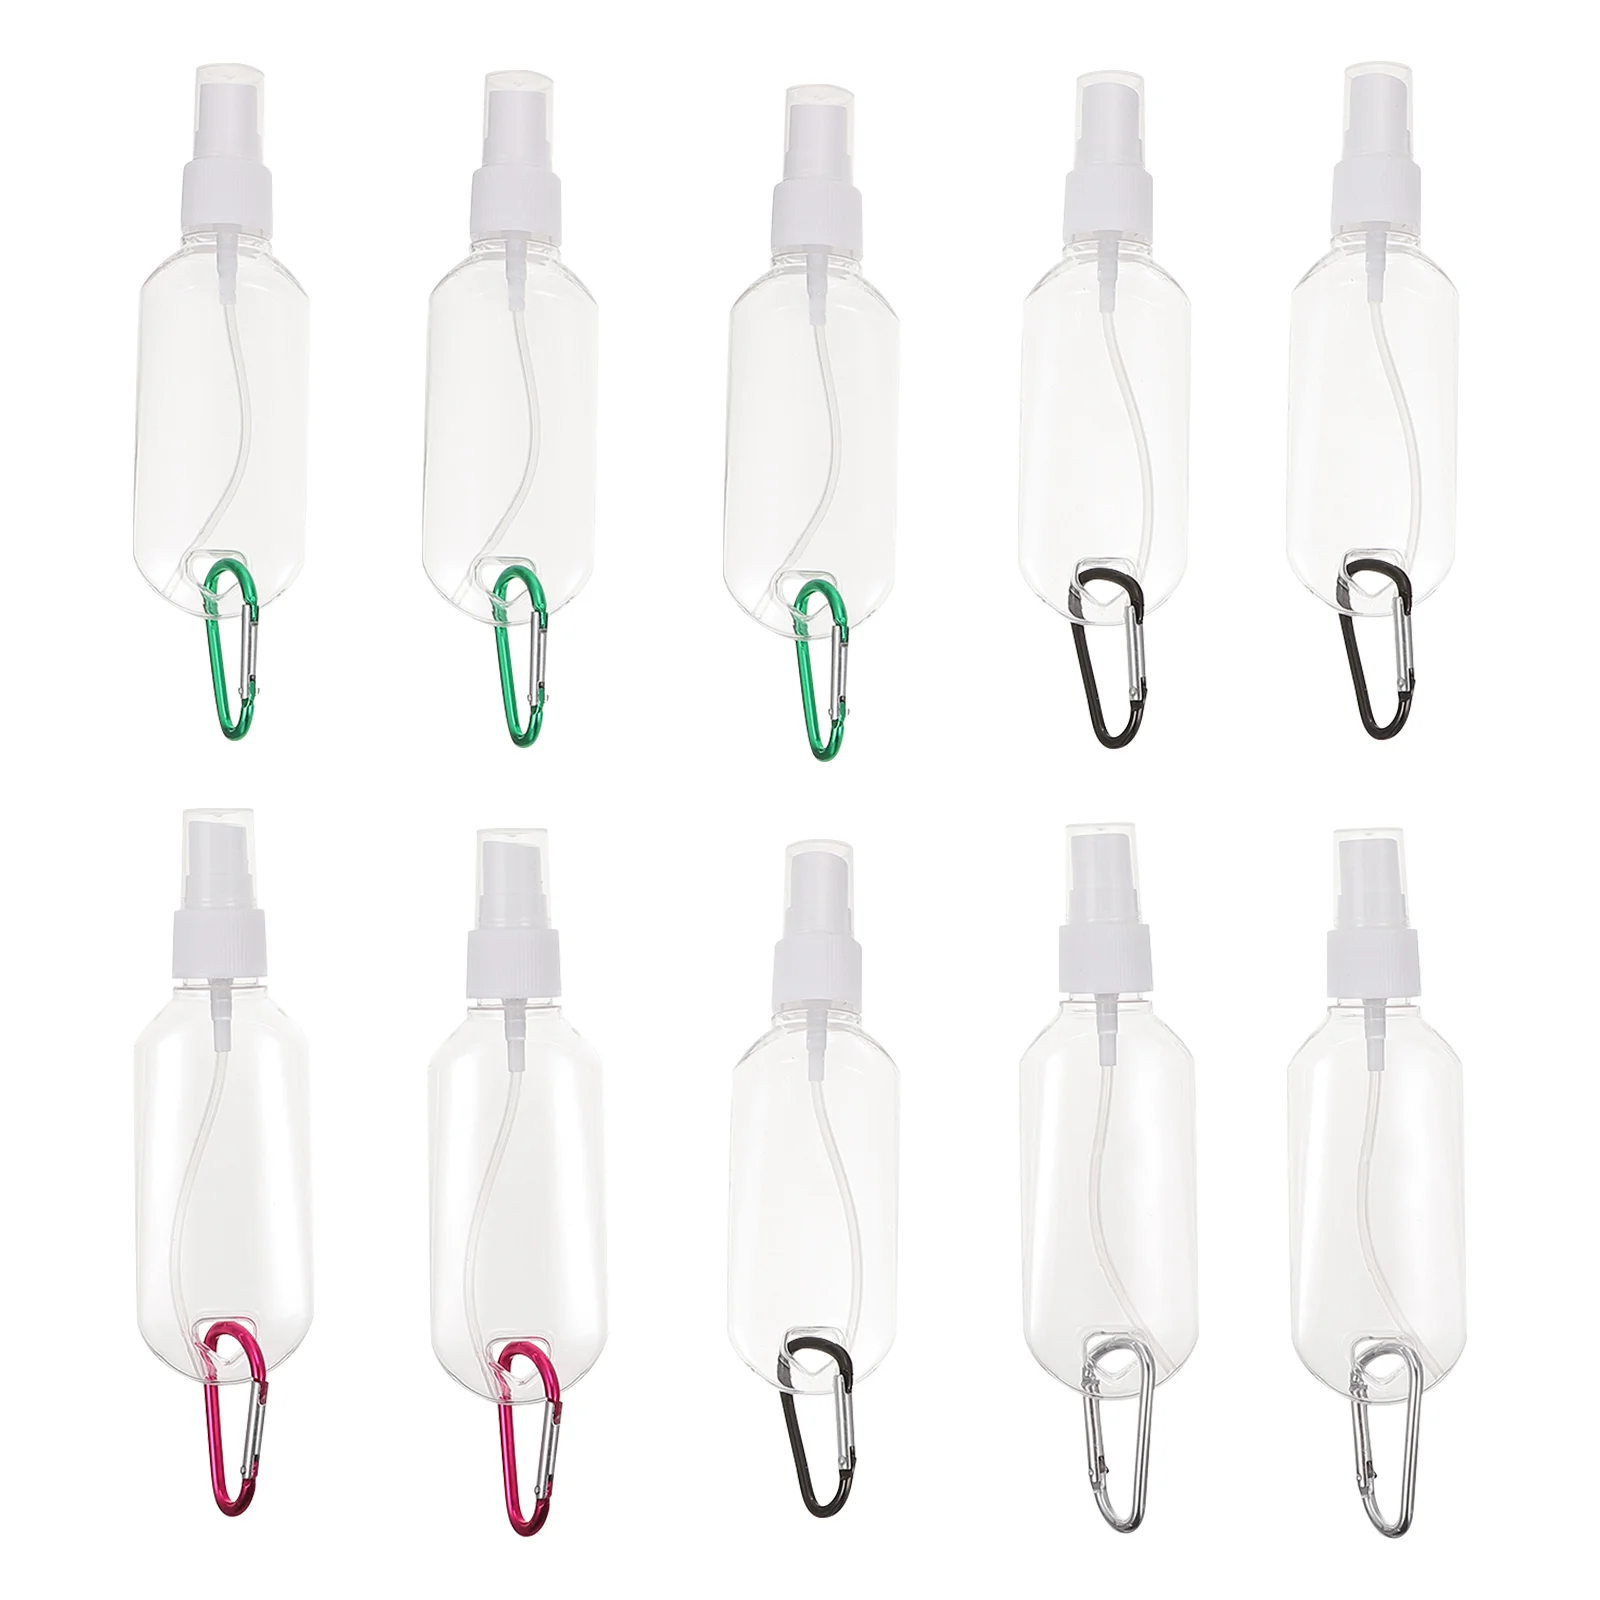 

10 Pcs Keychain Spray Bottle Perfume Bottles Dividing Travel Holders Containers Liquids Lotion Dispensers Spraying